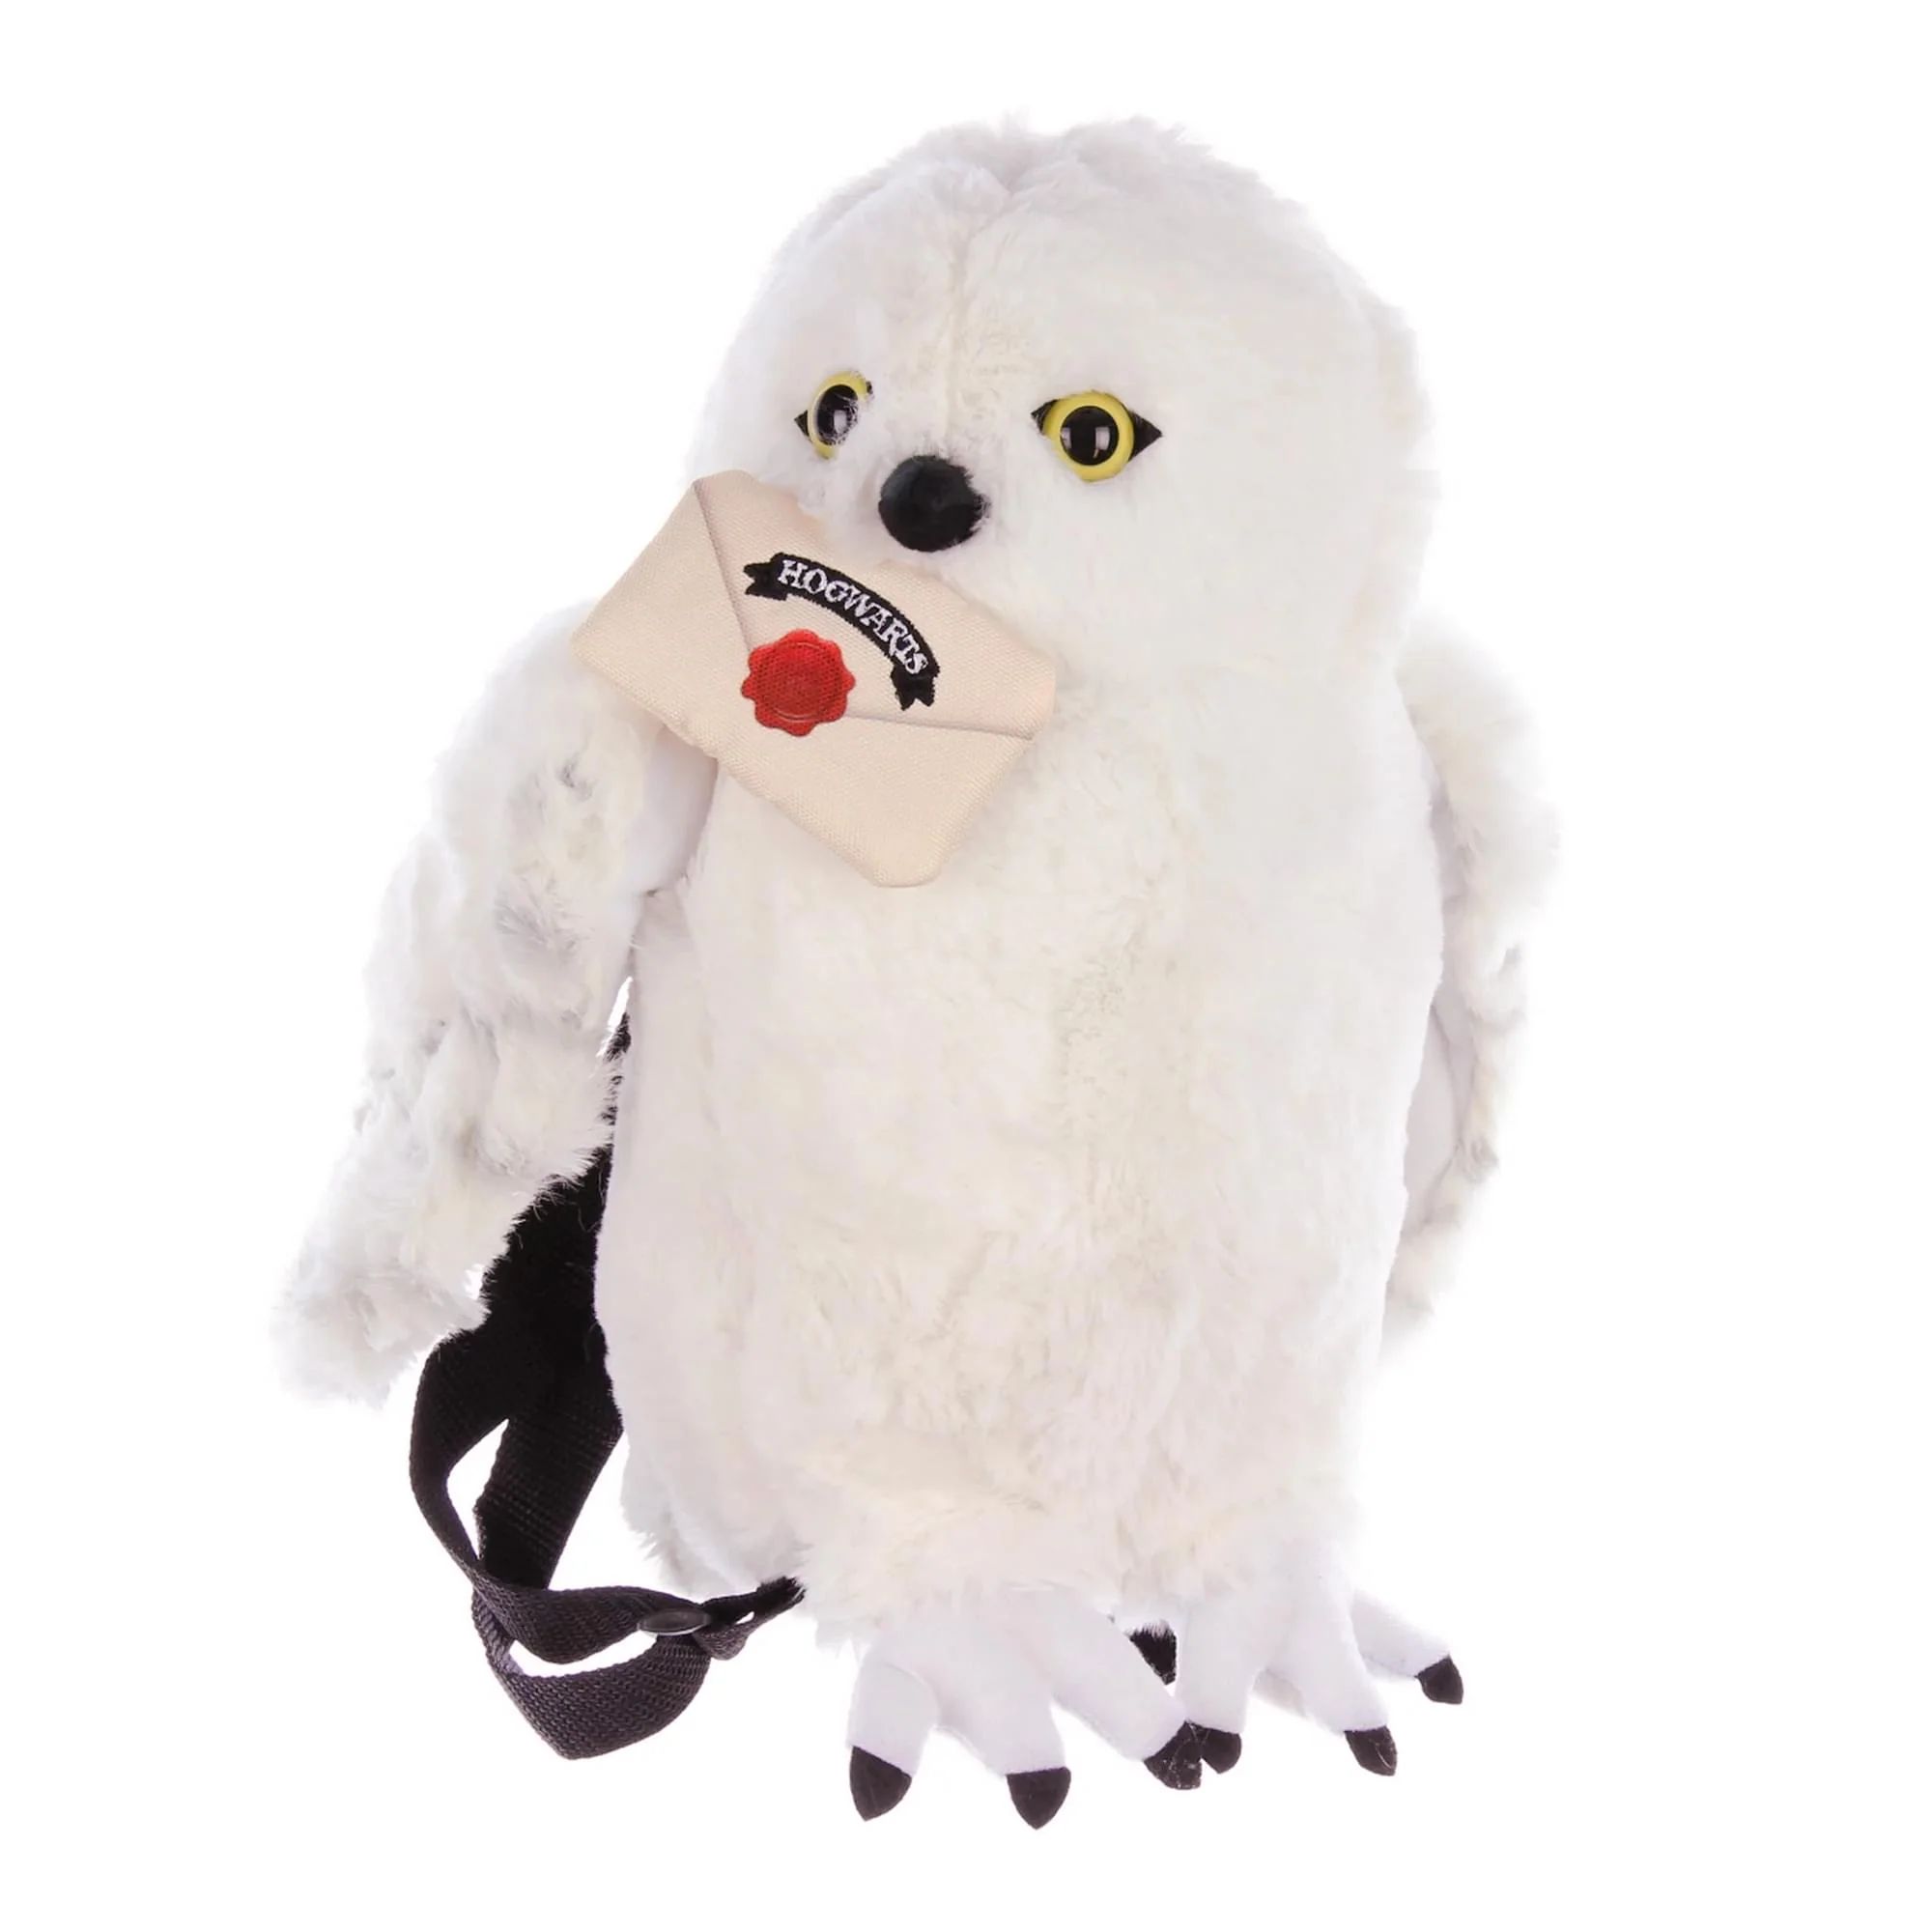 Harry Potter Hedwig The Owl 17 Inch Plush Backpack | Toynk